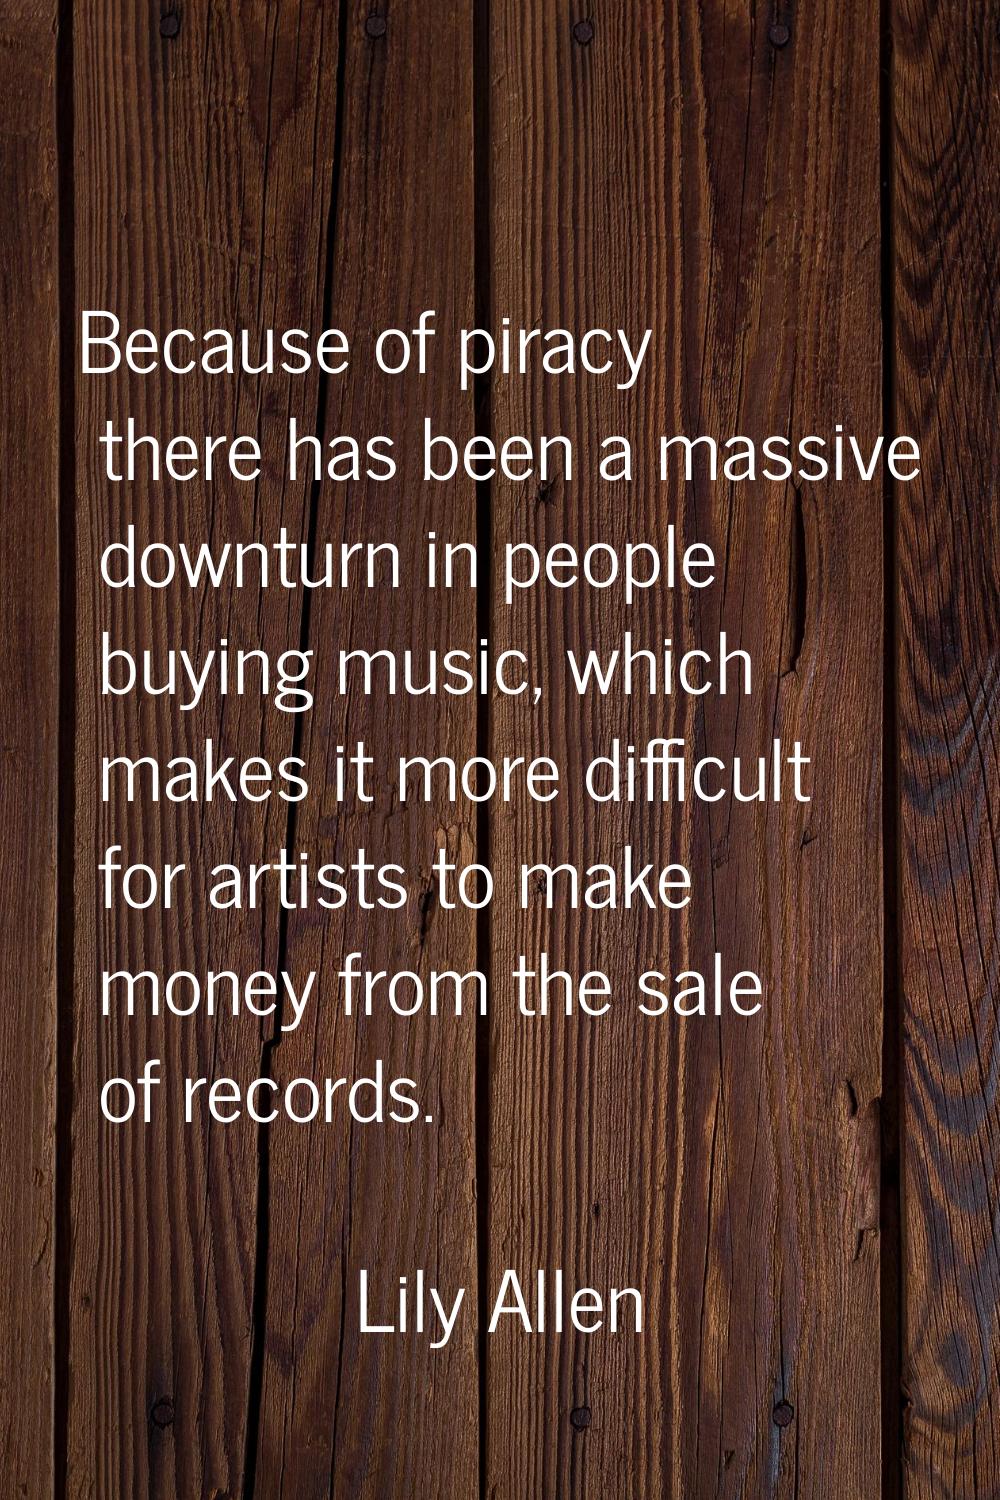 Because of piracy there has been a massive downturn in people buying music, which makes it more dif